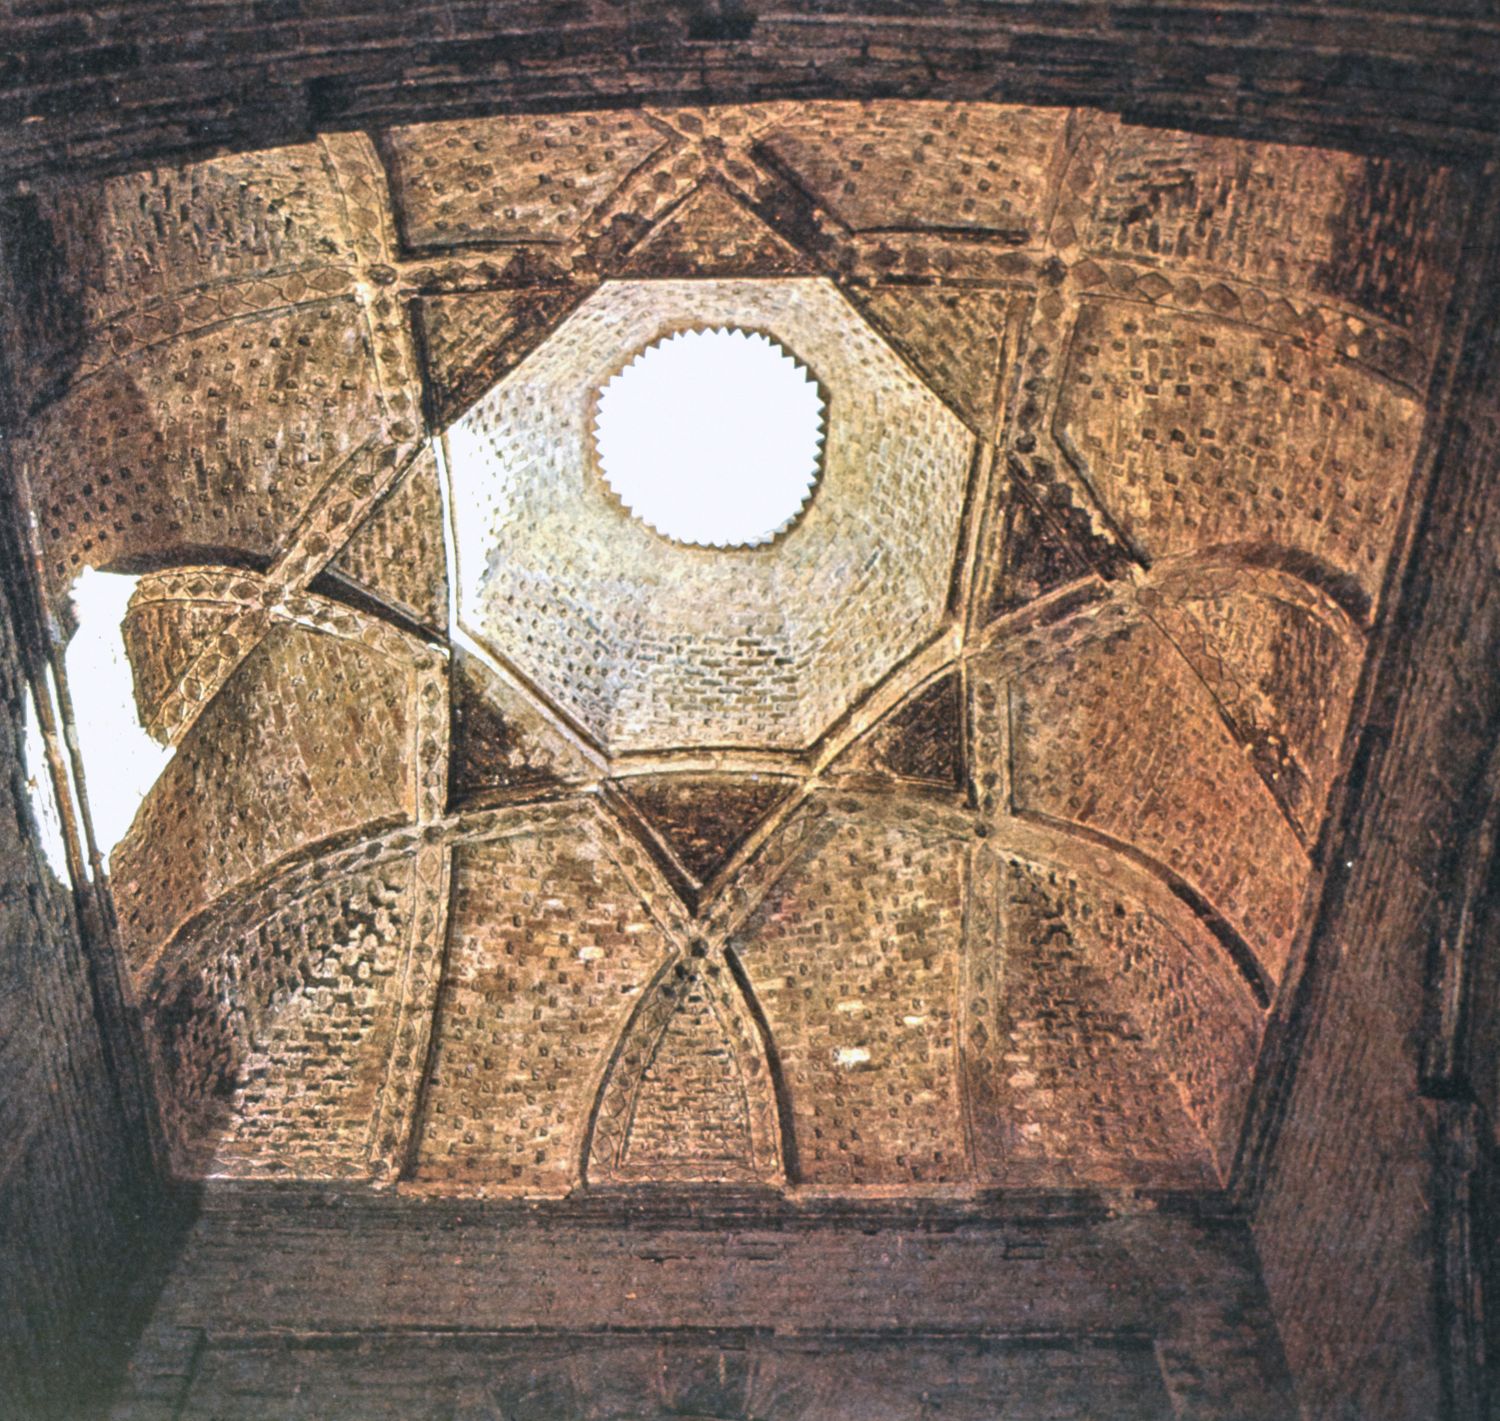 View of ribbed vault with skylight in southwestern hypostyle area.